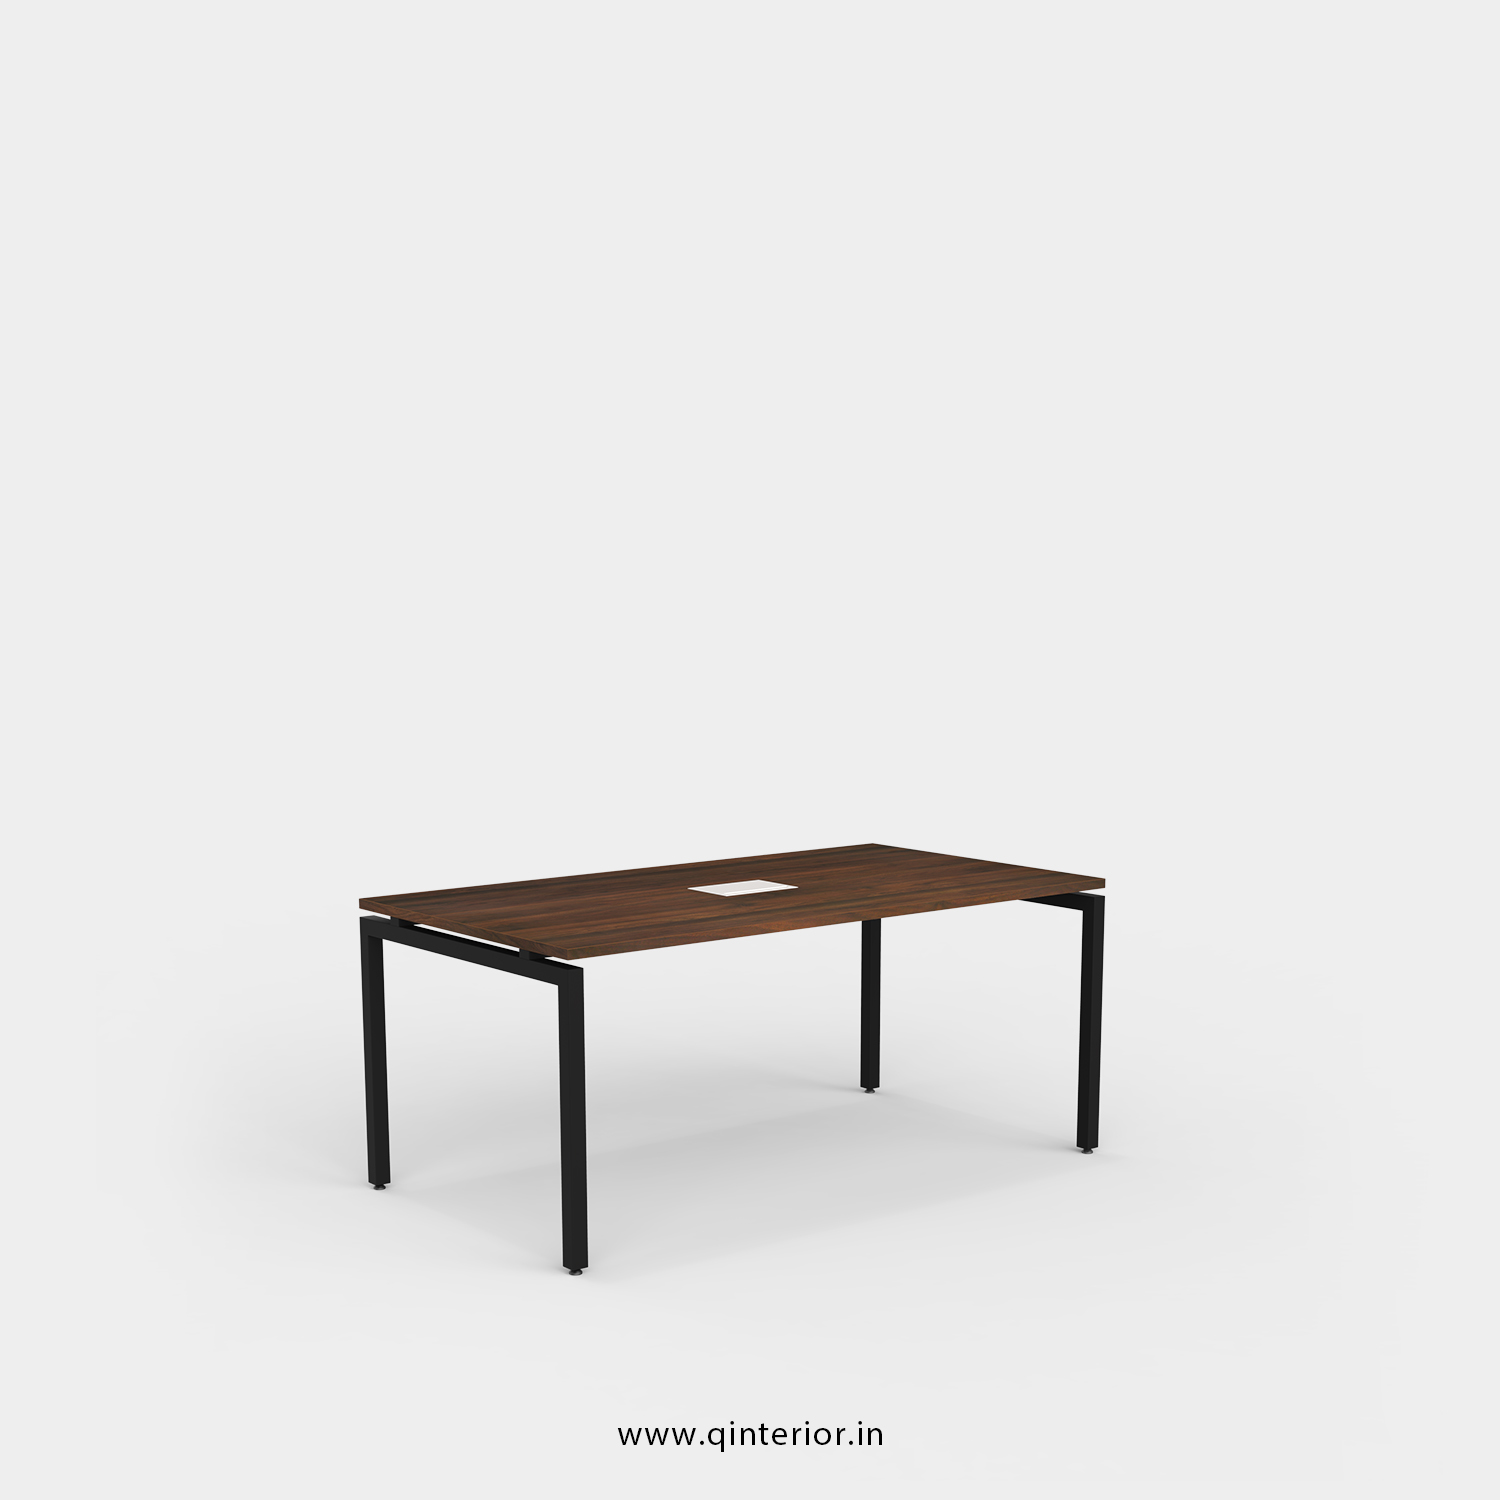 Montel Meeting Table in Walnut Finish – OMT001 C1